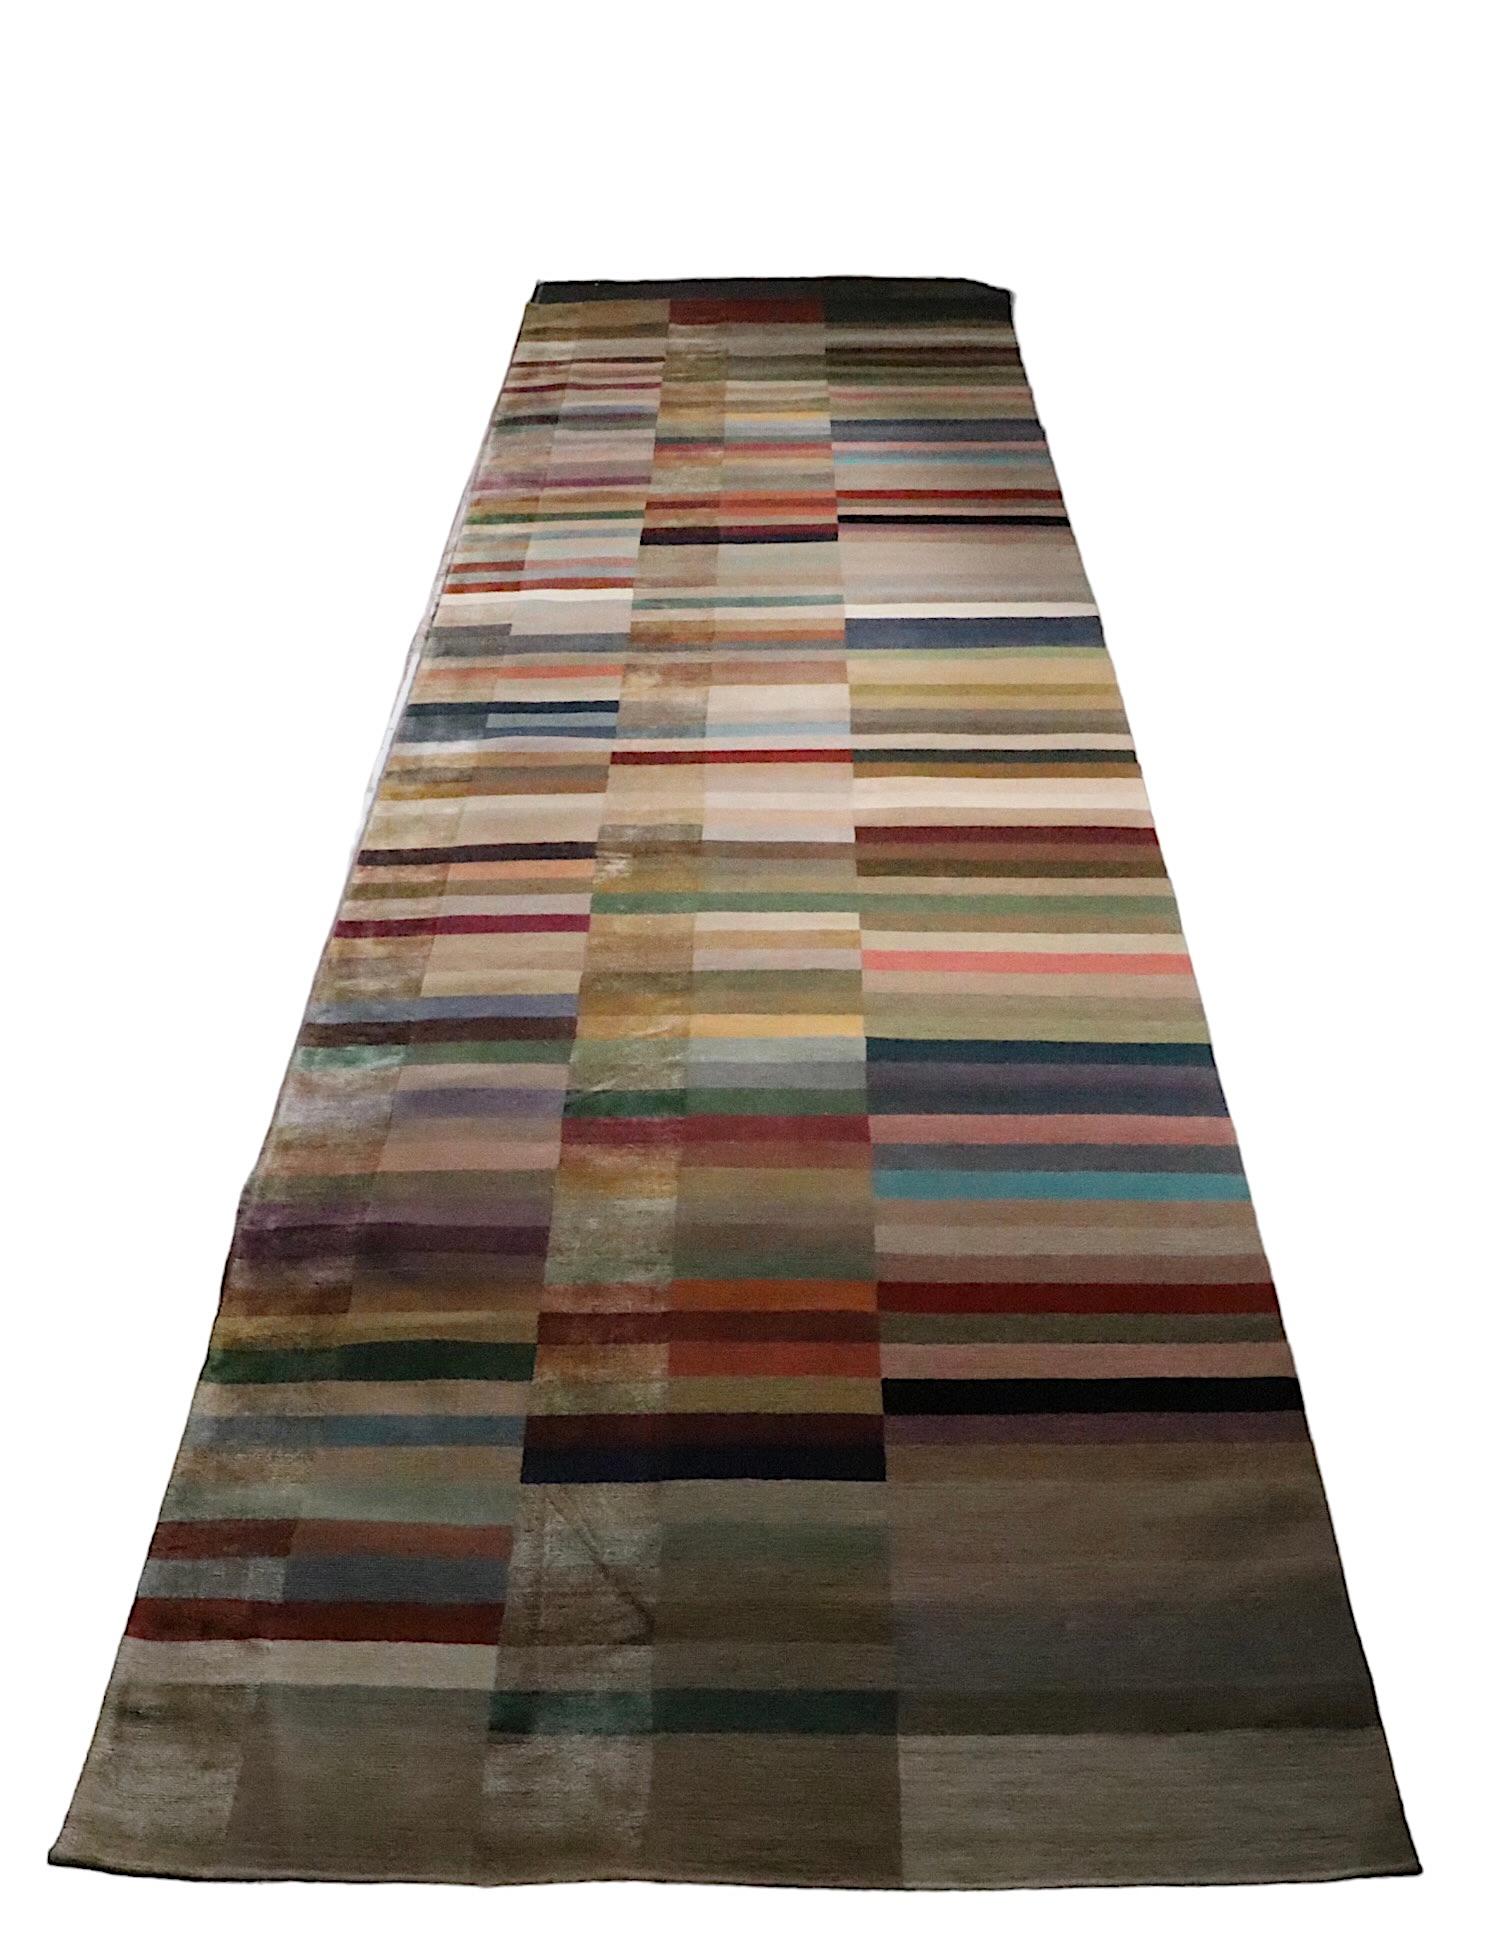 Long Cut Pile Wool and Silk Cut Pile Spectrum Runner by The Rug Company 2010 For Sale 2